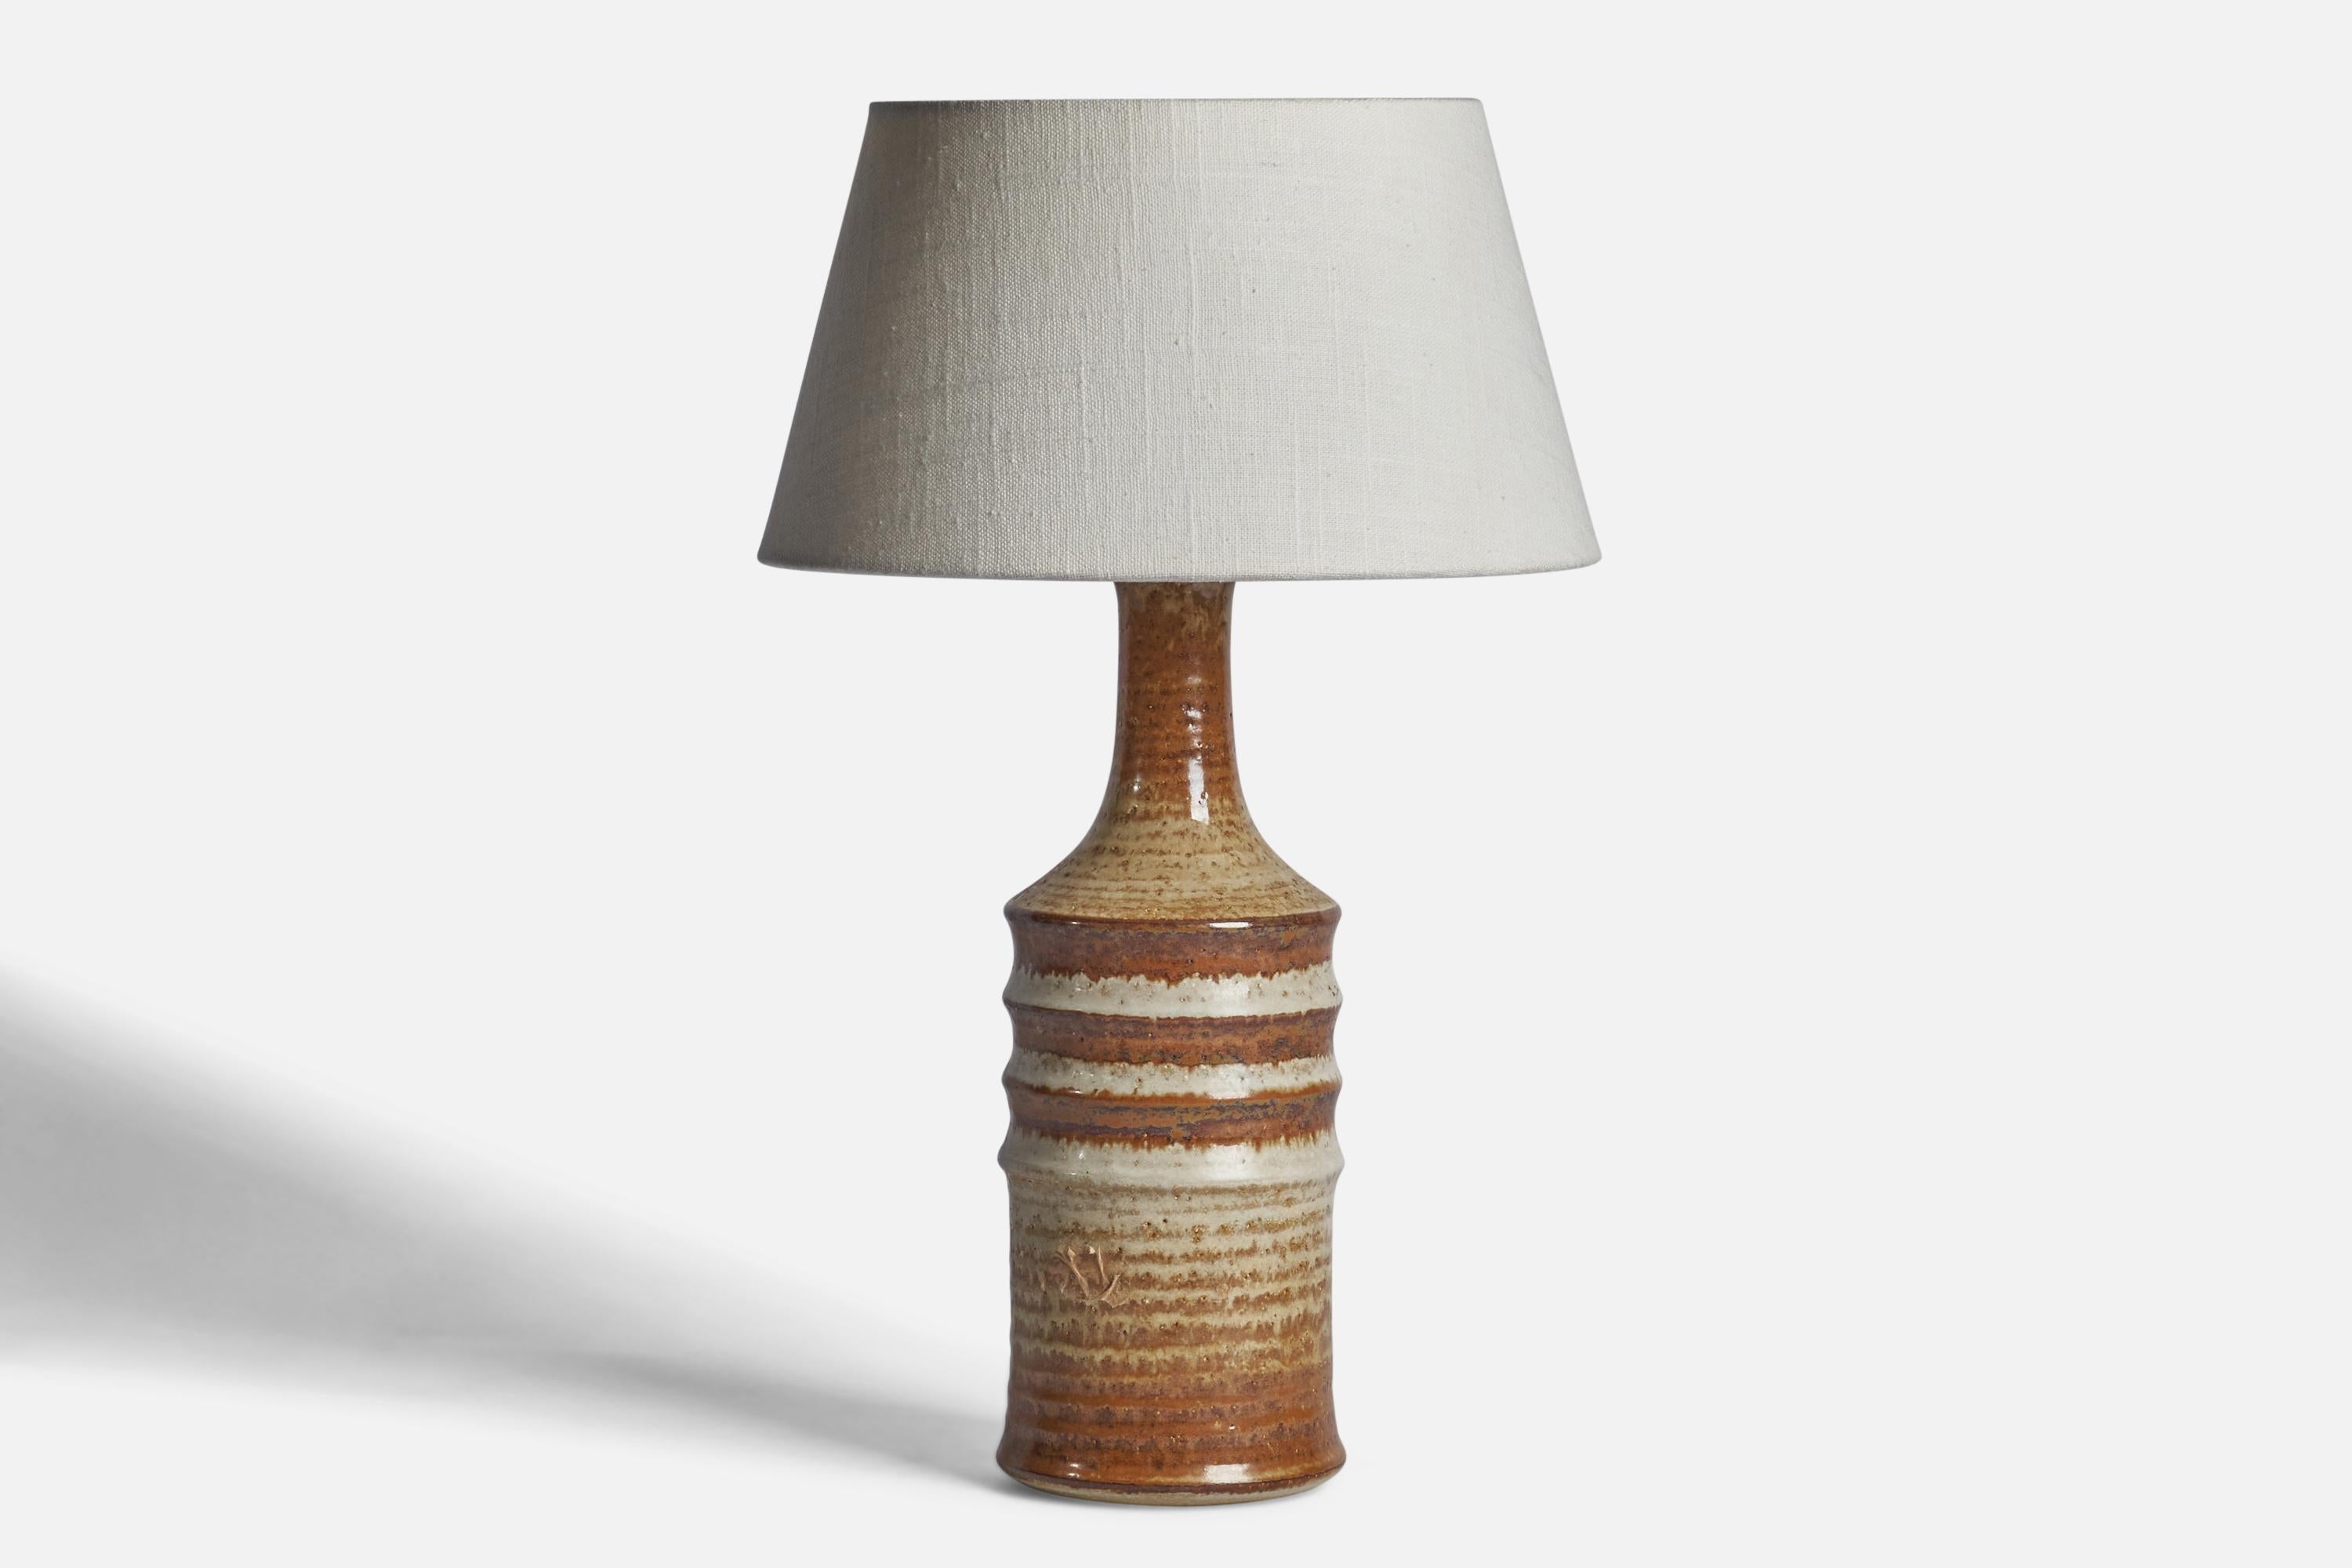 A brown and beige-glazed stoneware table lamp designed and produced by  Søholm, Denmark, 1960s.

Dimensions of Lamp (inches): 13.5” H x 4.25” Diameter
Dimensions of Shade (inches): 7” Top Diameter x 10” Bottom Diameter x 5.5” H 
Dimensions of Lamp